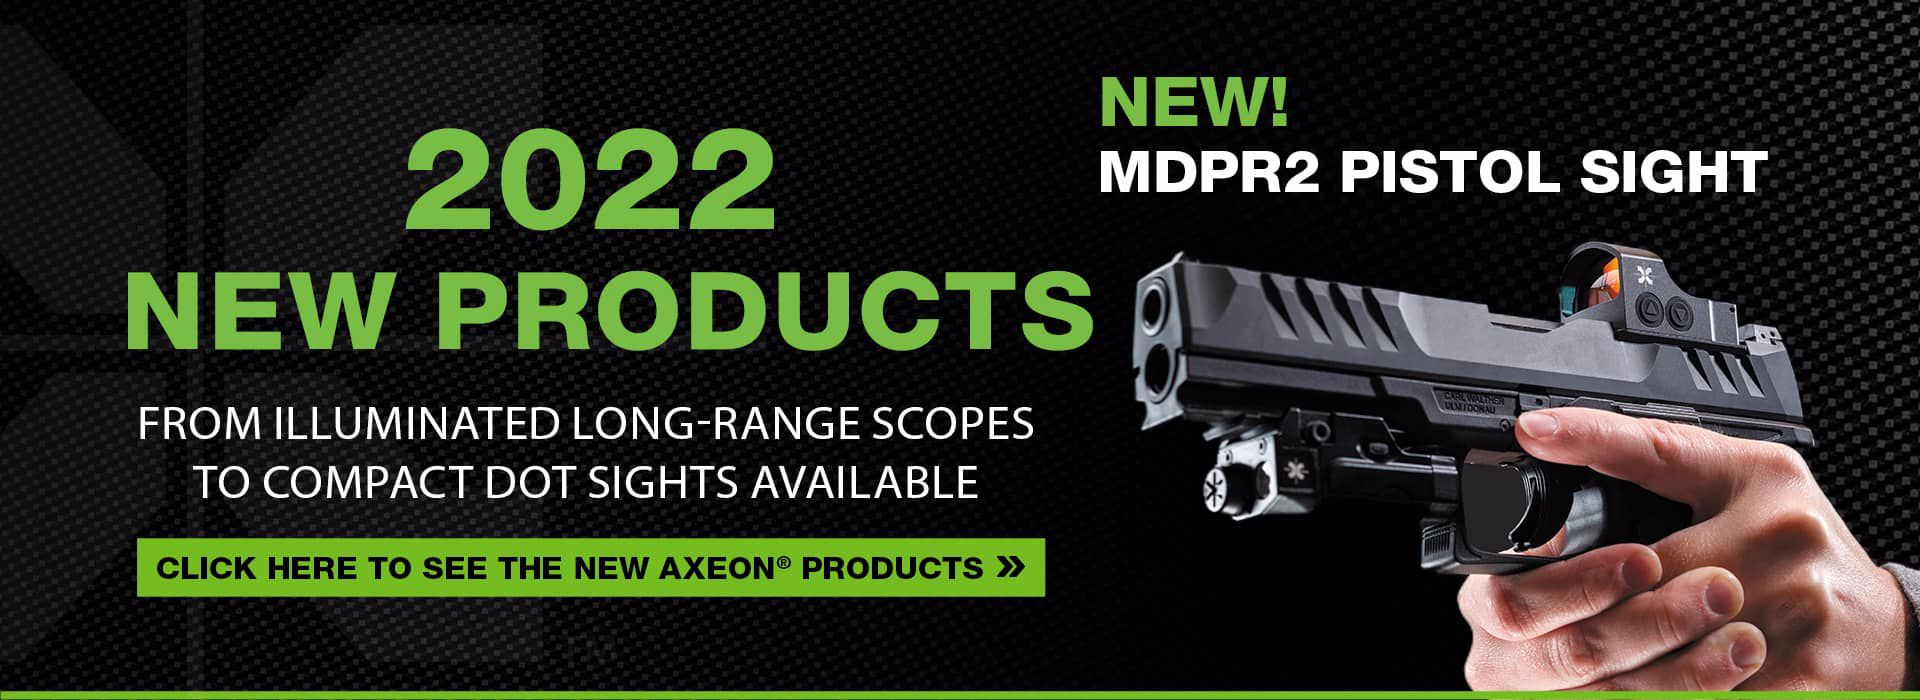 2022 New Products. From Illuminated Long-Range Scopes to Compact Dot Sights Available. NEW! MDPR 2 Pistol Sight. Click Here to see the New Axeon Products